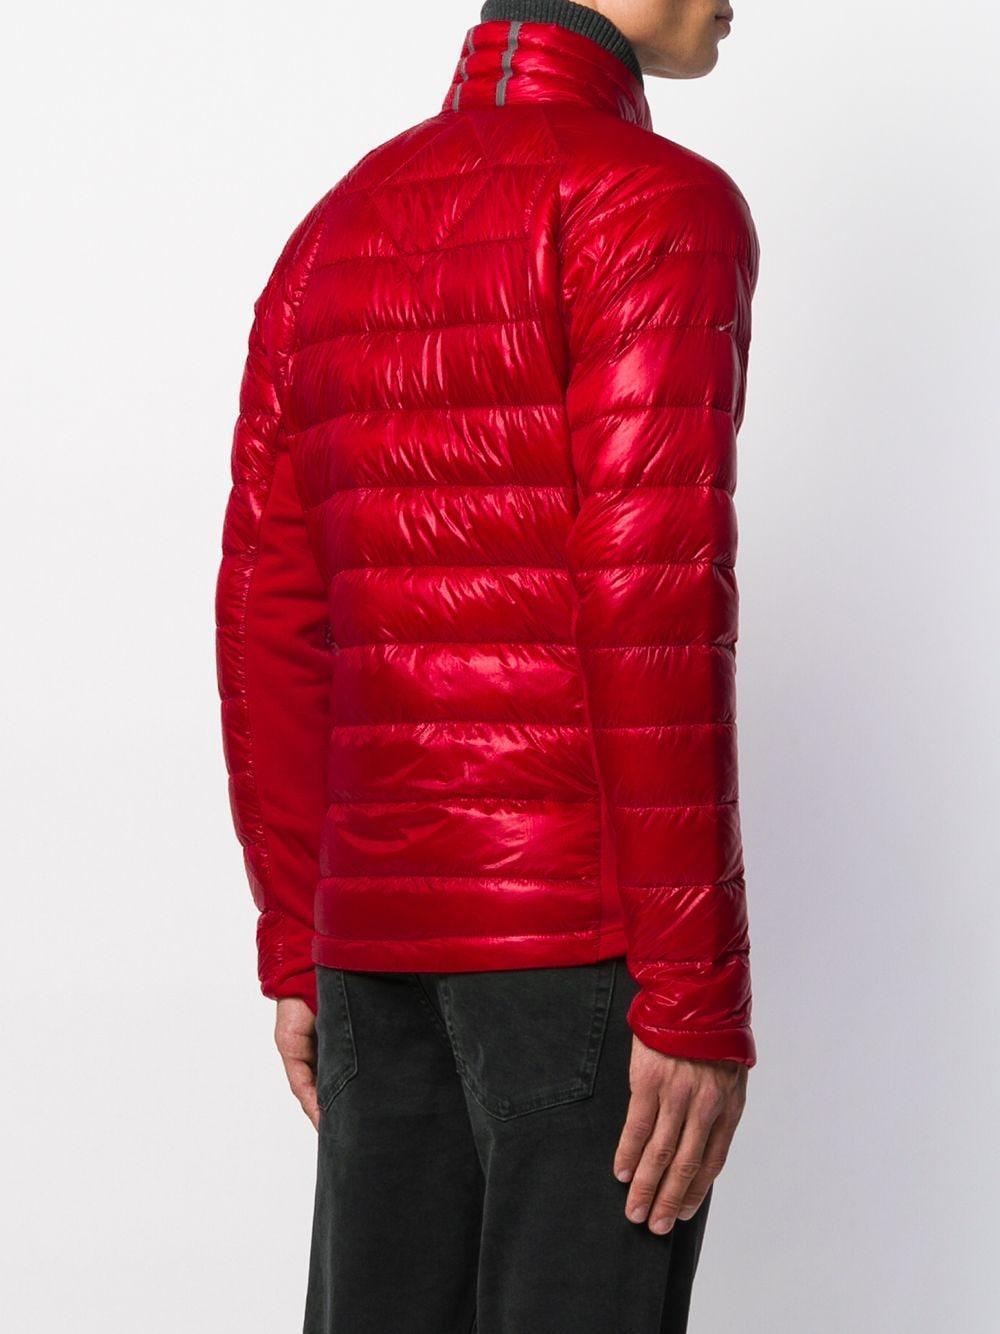 Canada Goose Goose Fitted Puffer Jacket in Red for Men - Lyst